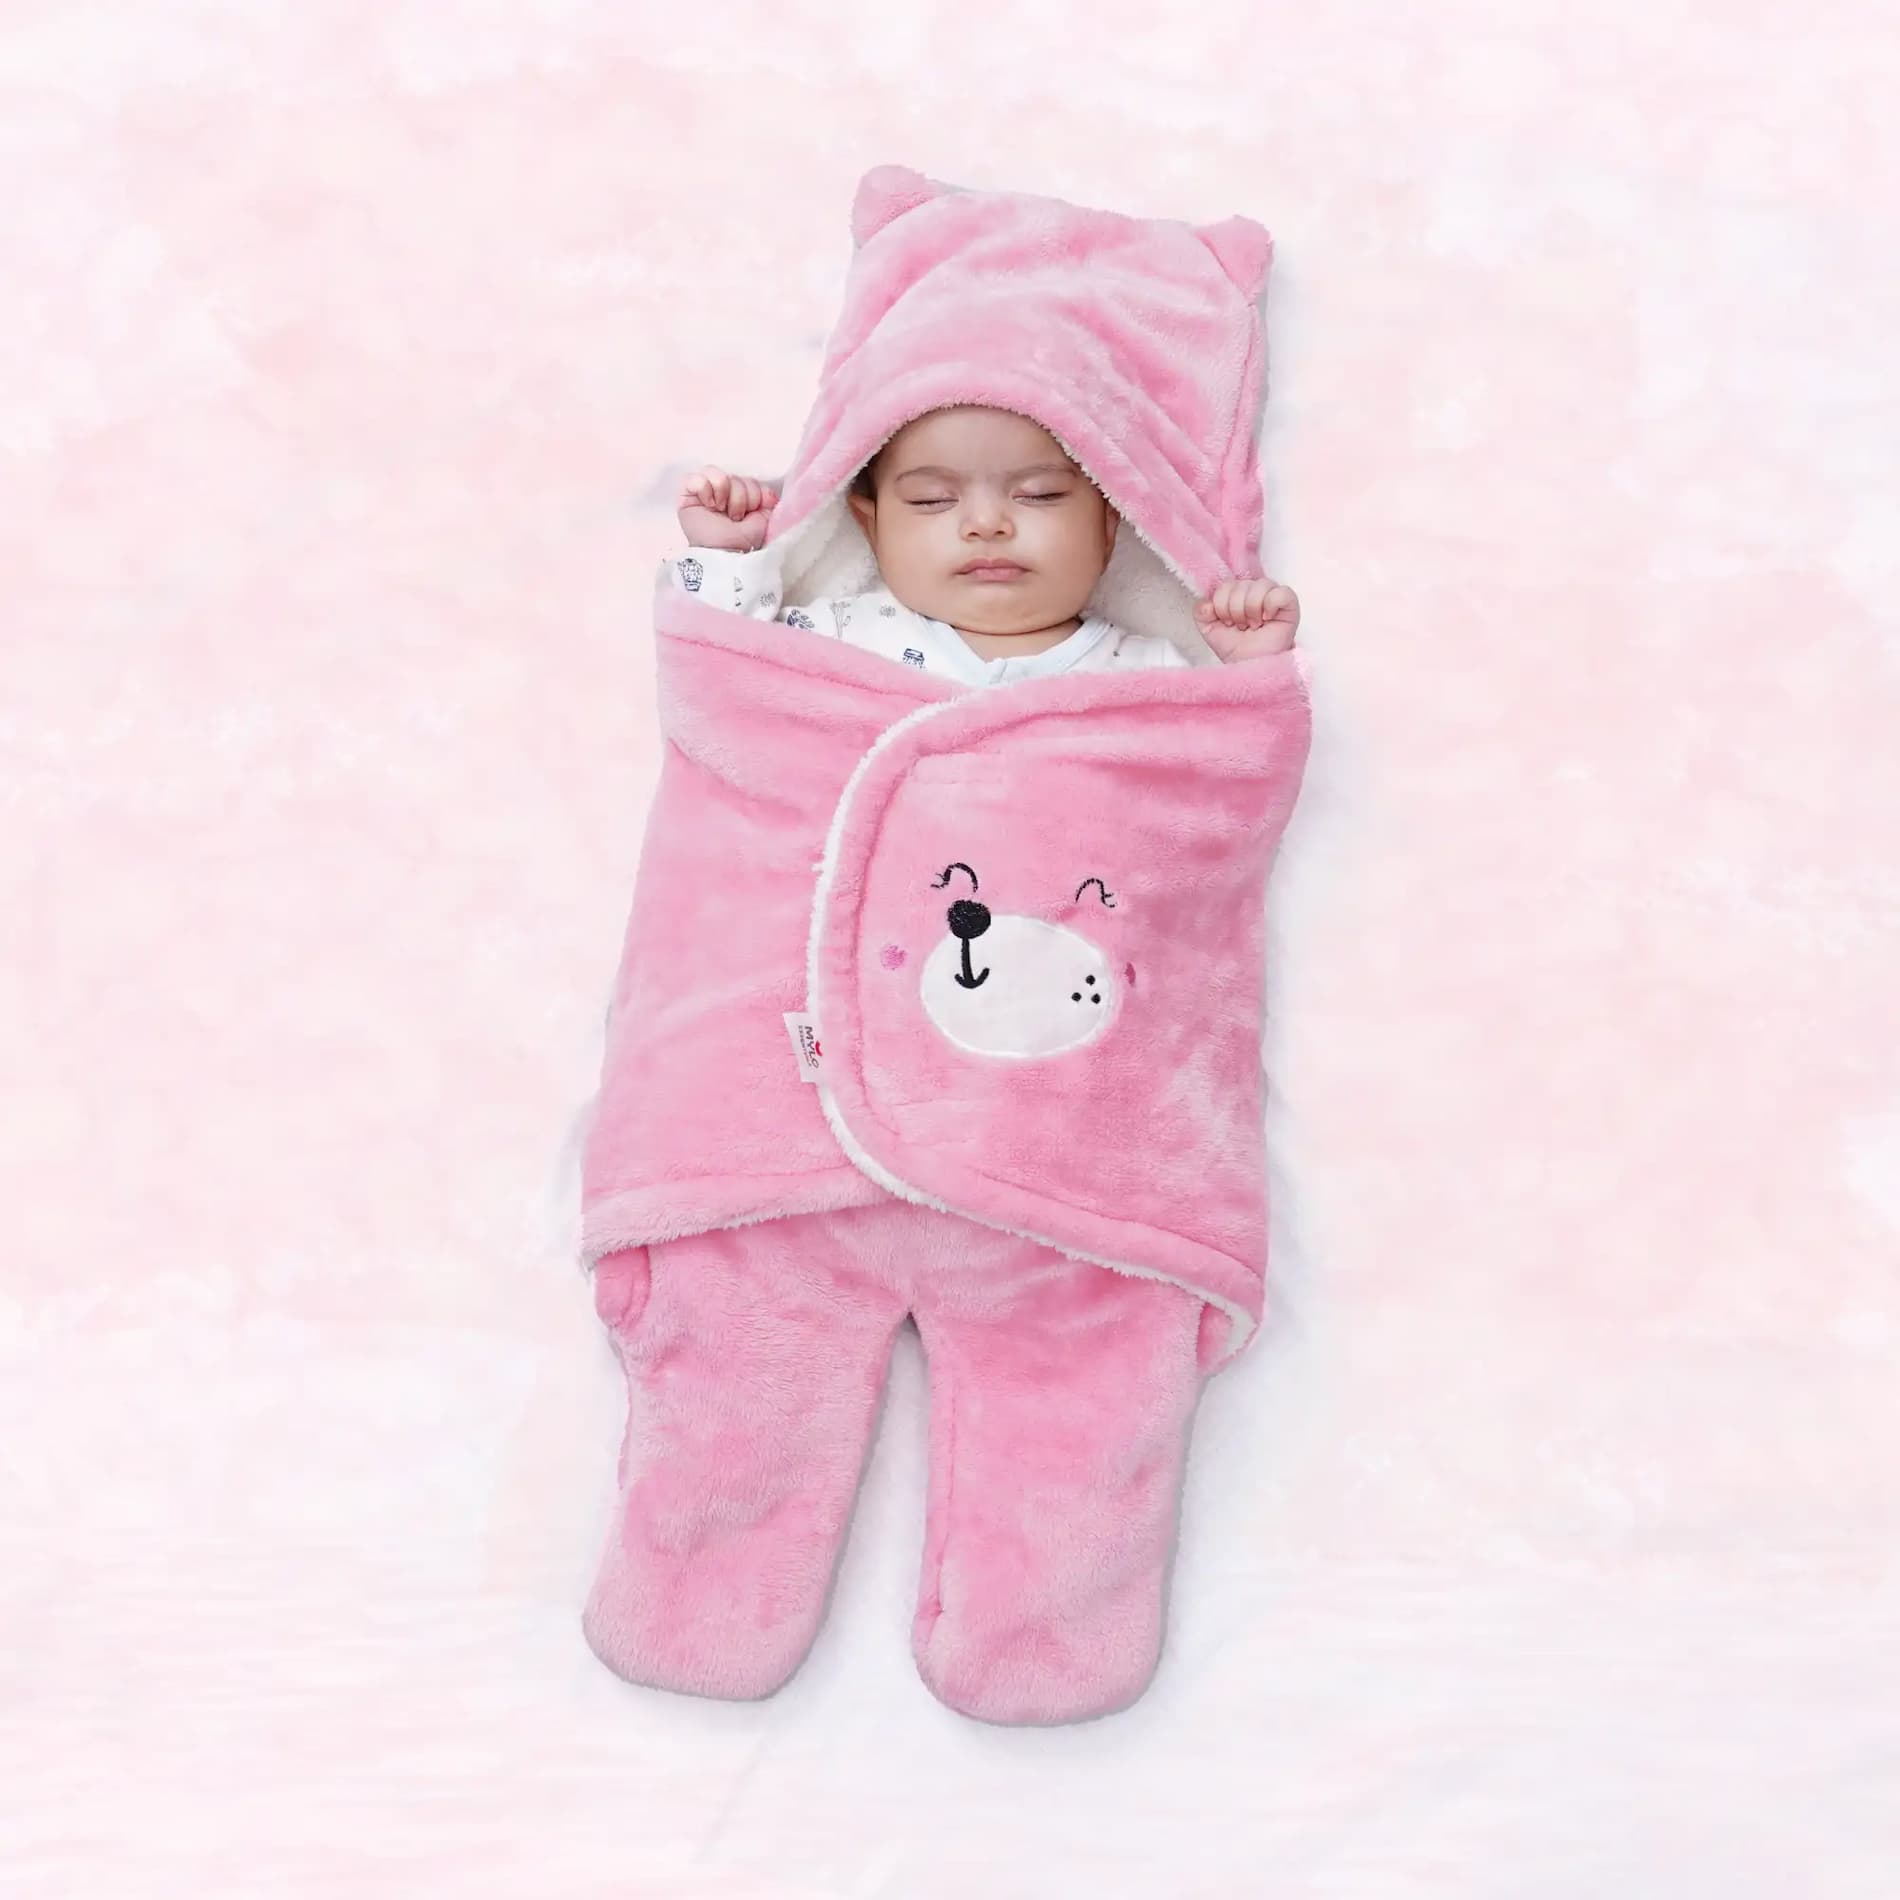 Baby Wrapper for New Born | Baby Swaddling Wrapper | 4-in-1 All Season AC Blanket cum Sleeping Bag for Baby 0-6 Months - Light Pink